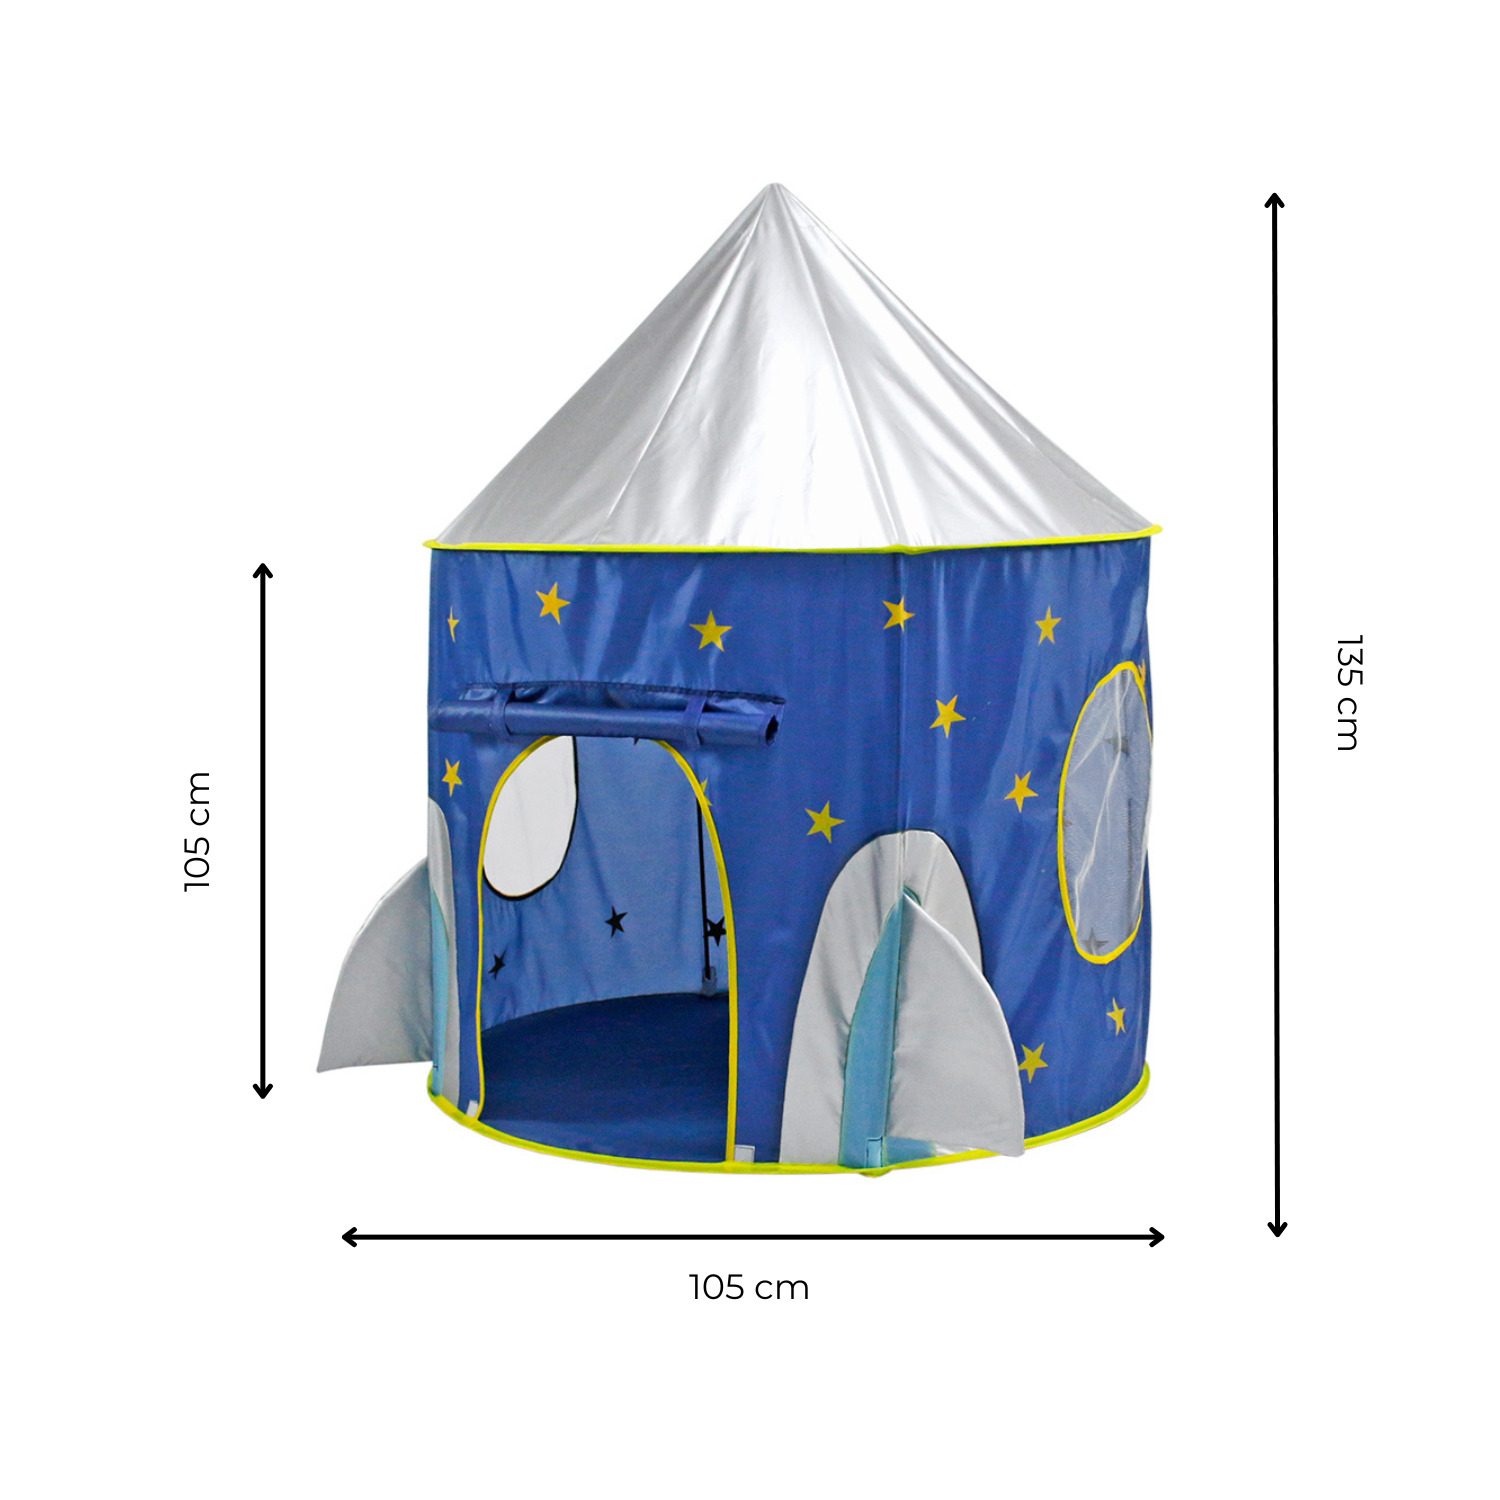 GOMINIMO 3 in 1 Sky Style Kids Play Tent with Carrying Bag (Blue and Yellow) GO-KT-100-LK - SILBERSHELL